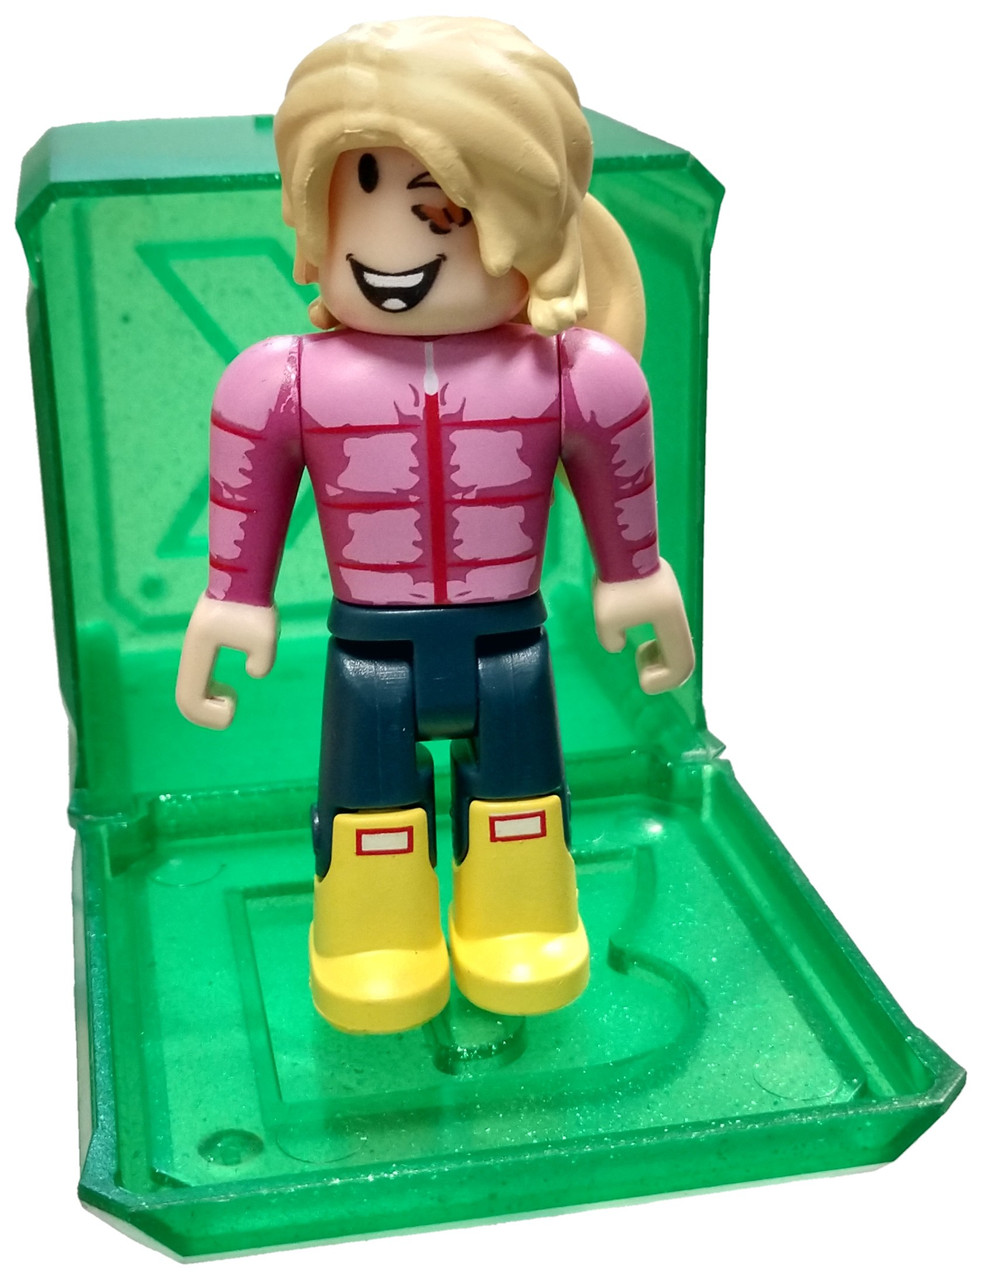 Roblox Celebrity Collection Series 4 Backpacking Campergirl 3 Mini Figure With Green Cube And Online Code Loose Jazwares Toywiz - roblox series 4 codes